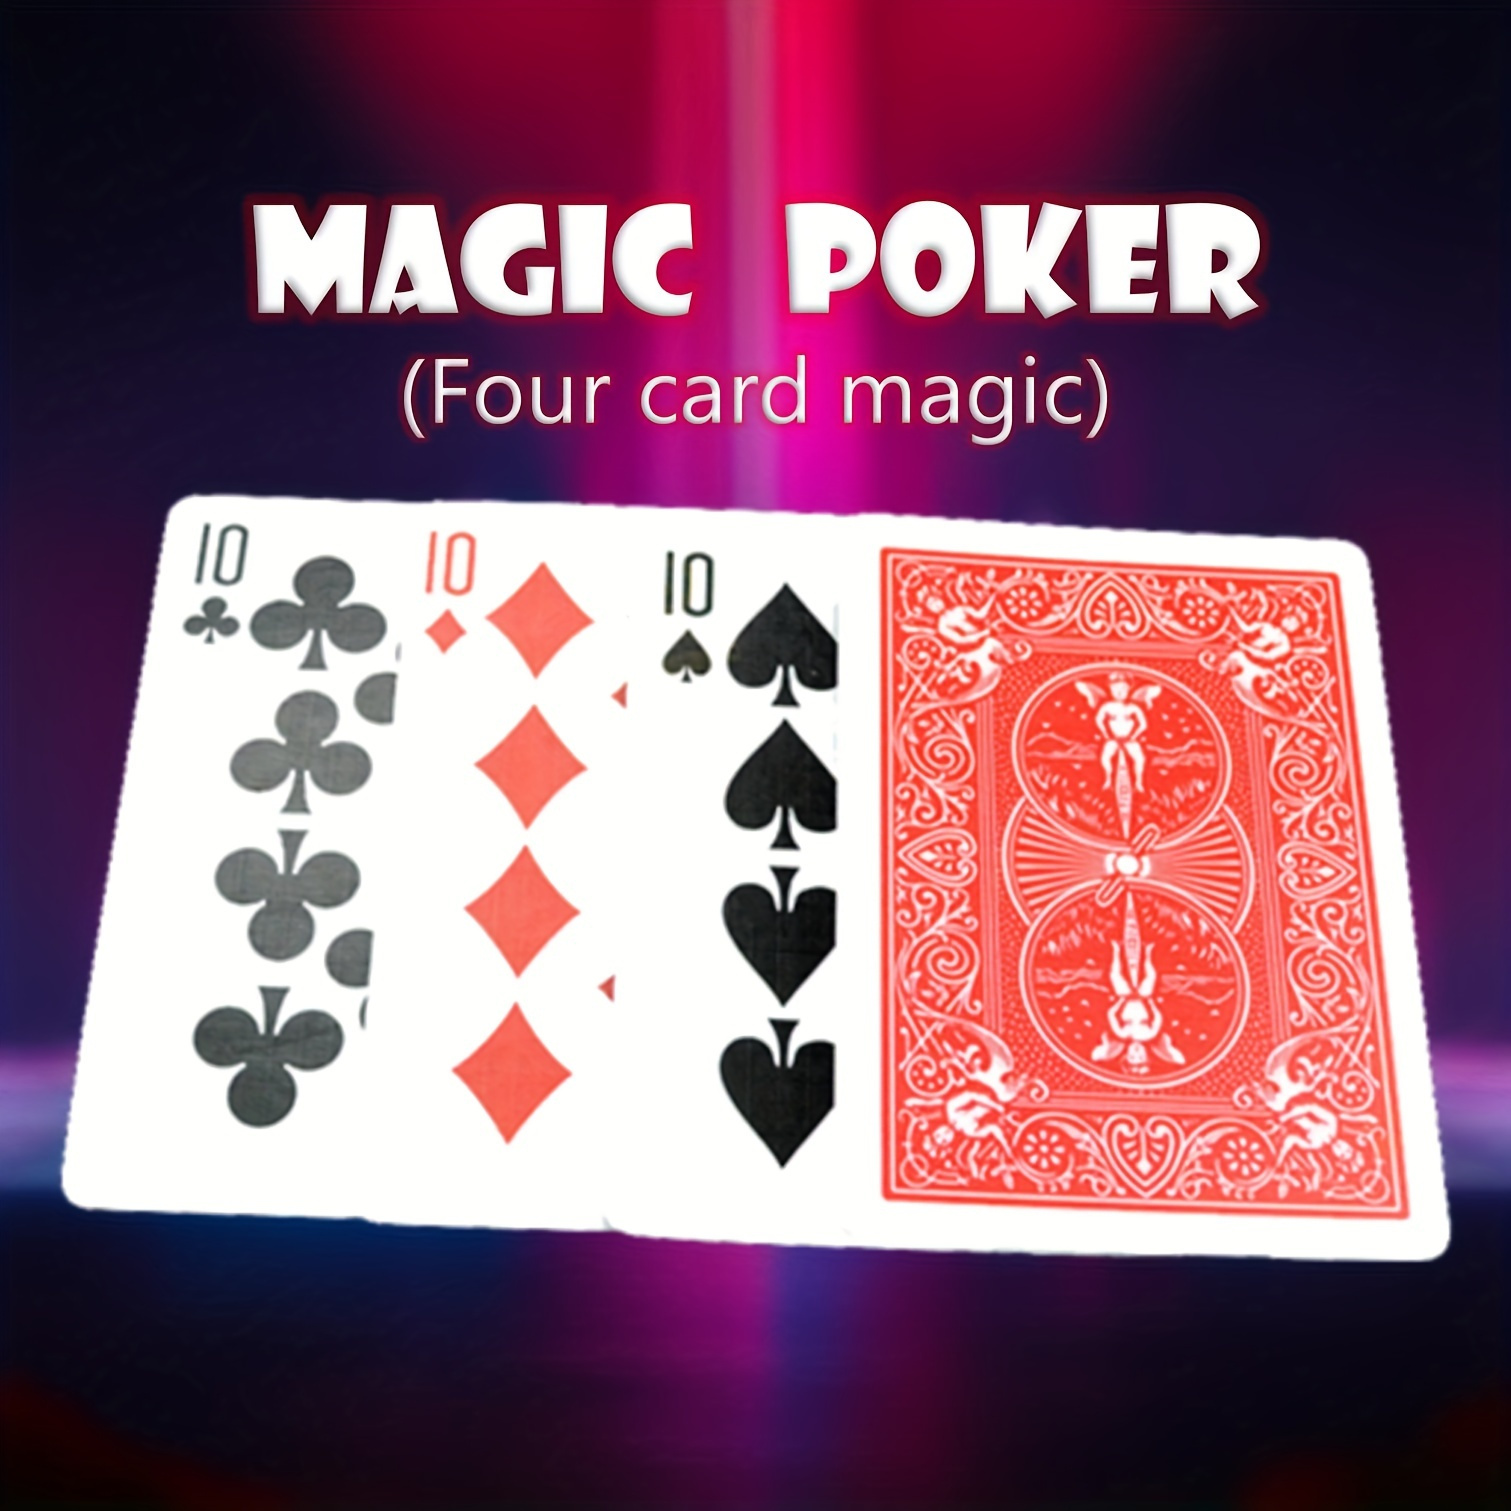 

1set Poker Magic, 4 Printed [10] Cards, These Cards Will Miraculously Turn From The Back Of 4 Cards Into 4 [10] Cards, Or Turn 4 [10] Cards Into 4 [a] Cards, Etc.